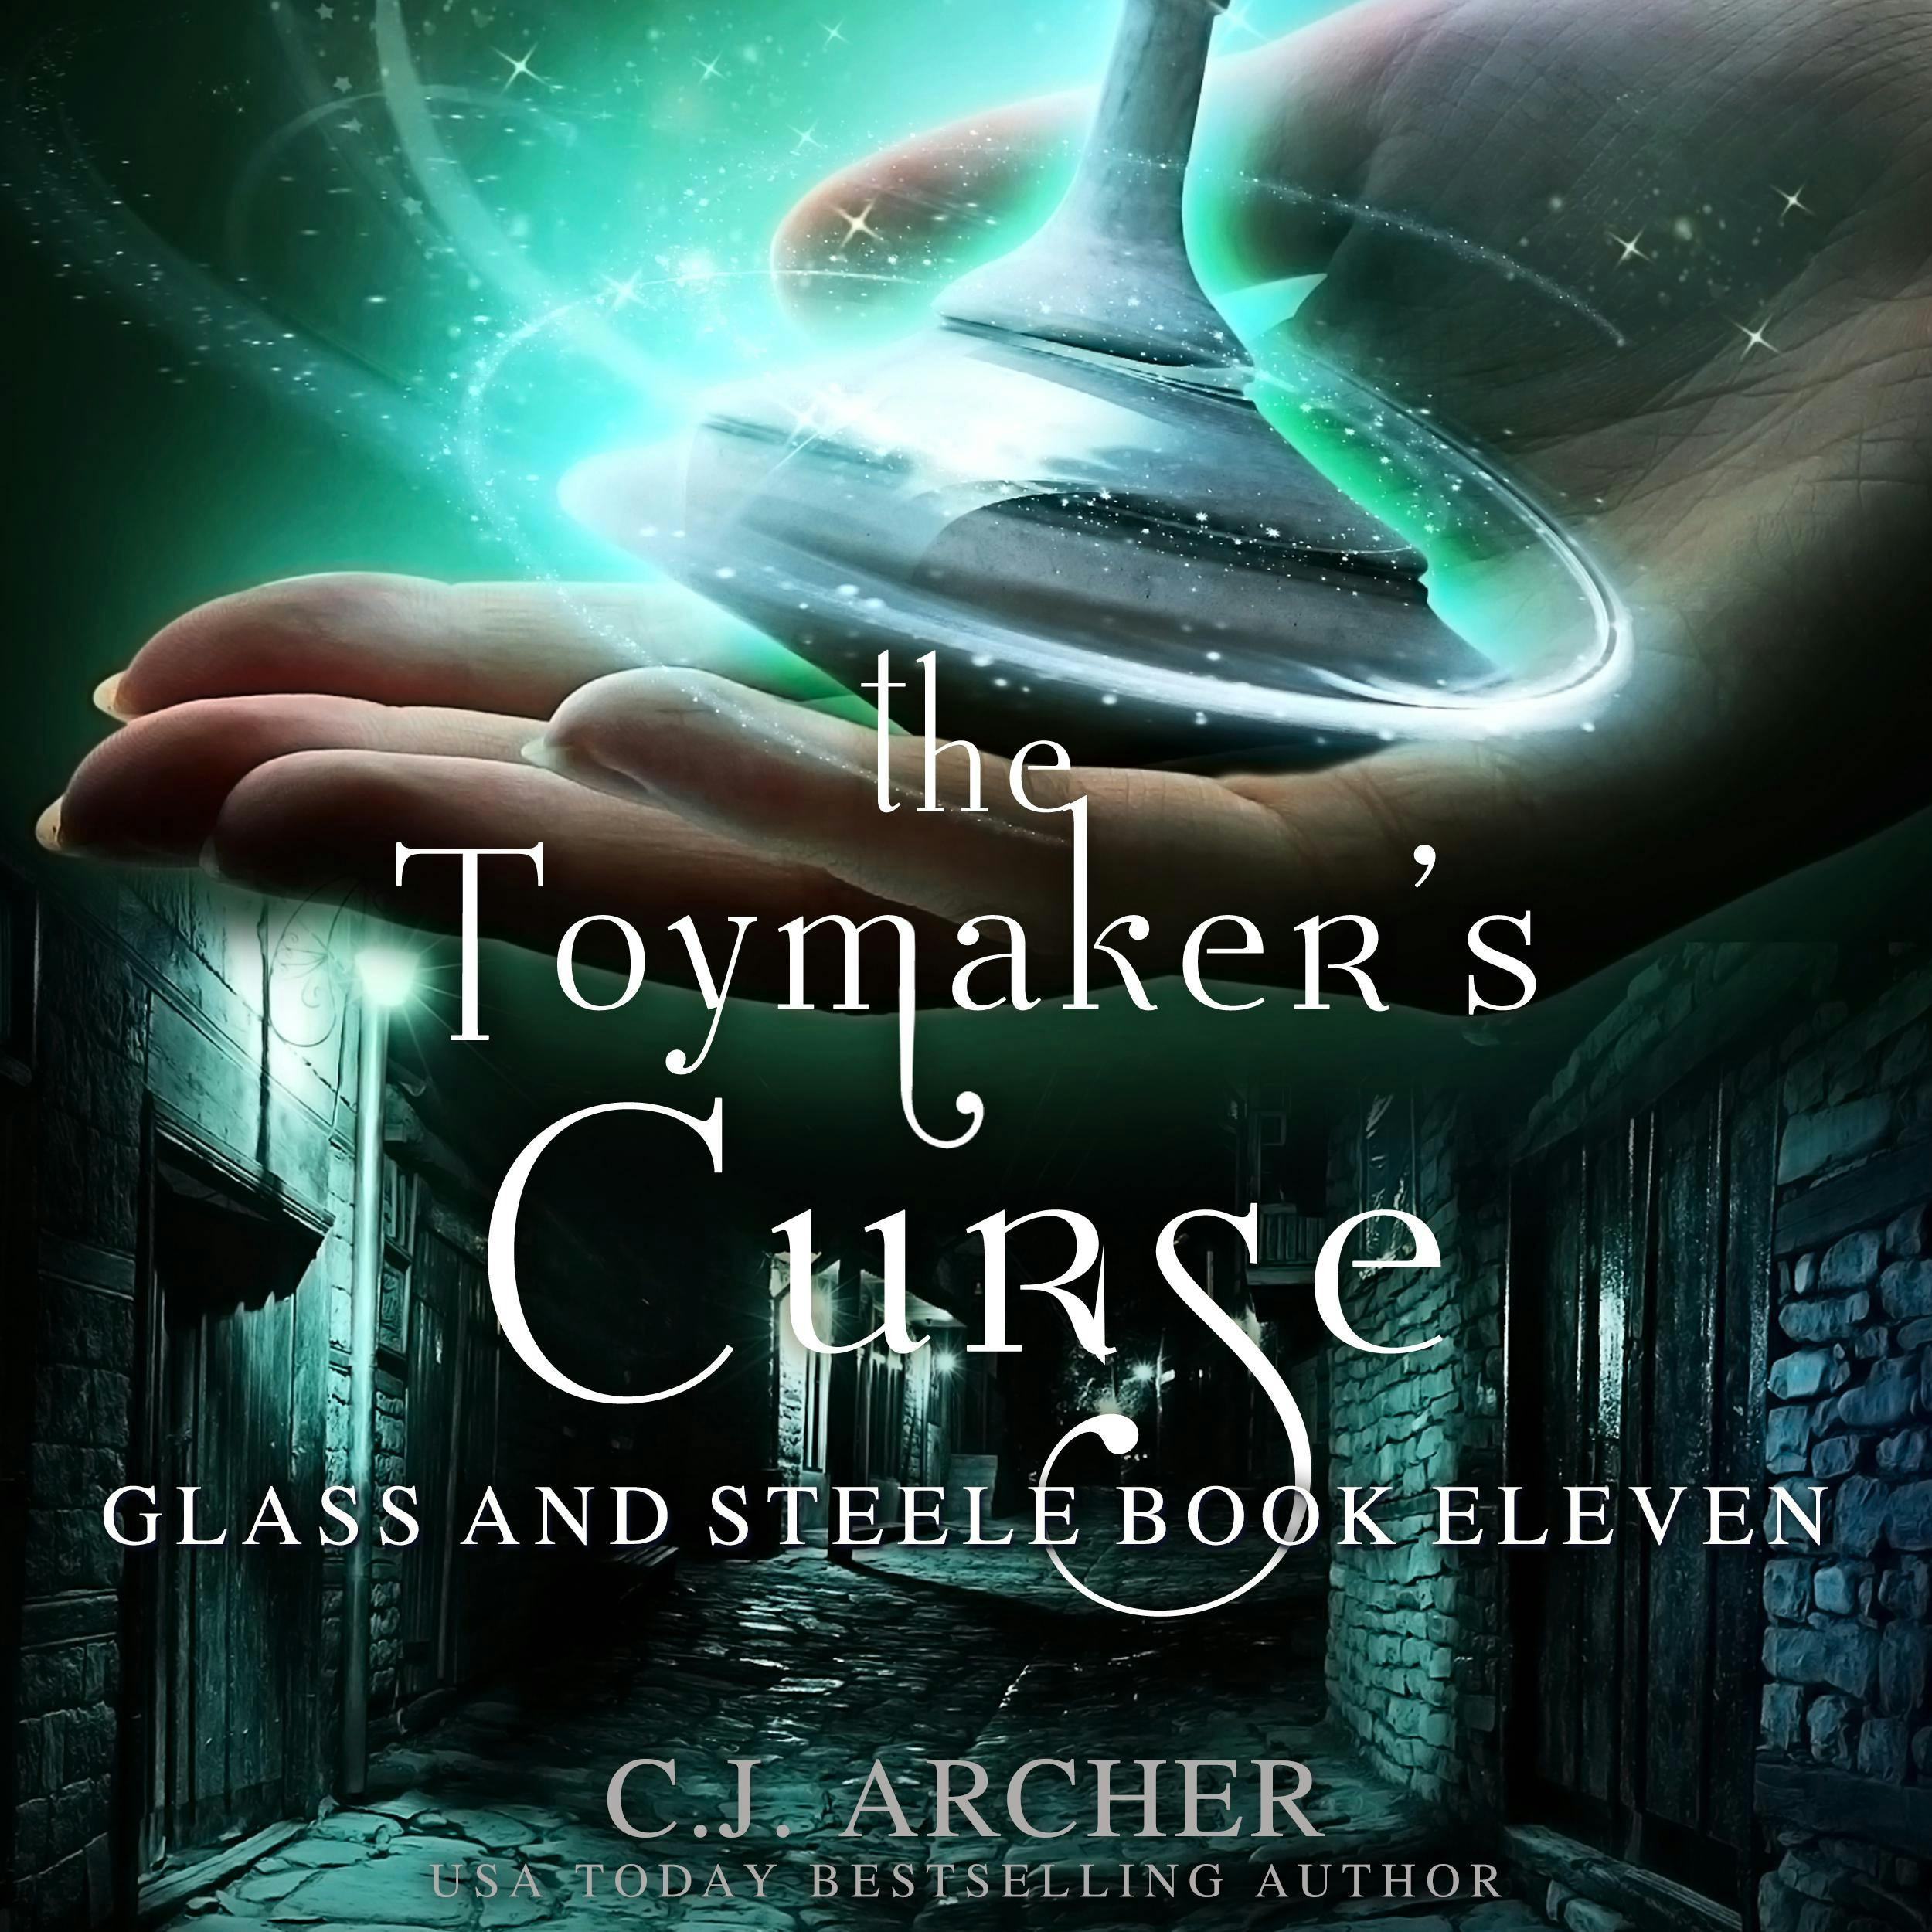 The Toymaker's Curse: Glass And Steele, book 11 - C.J. Archer